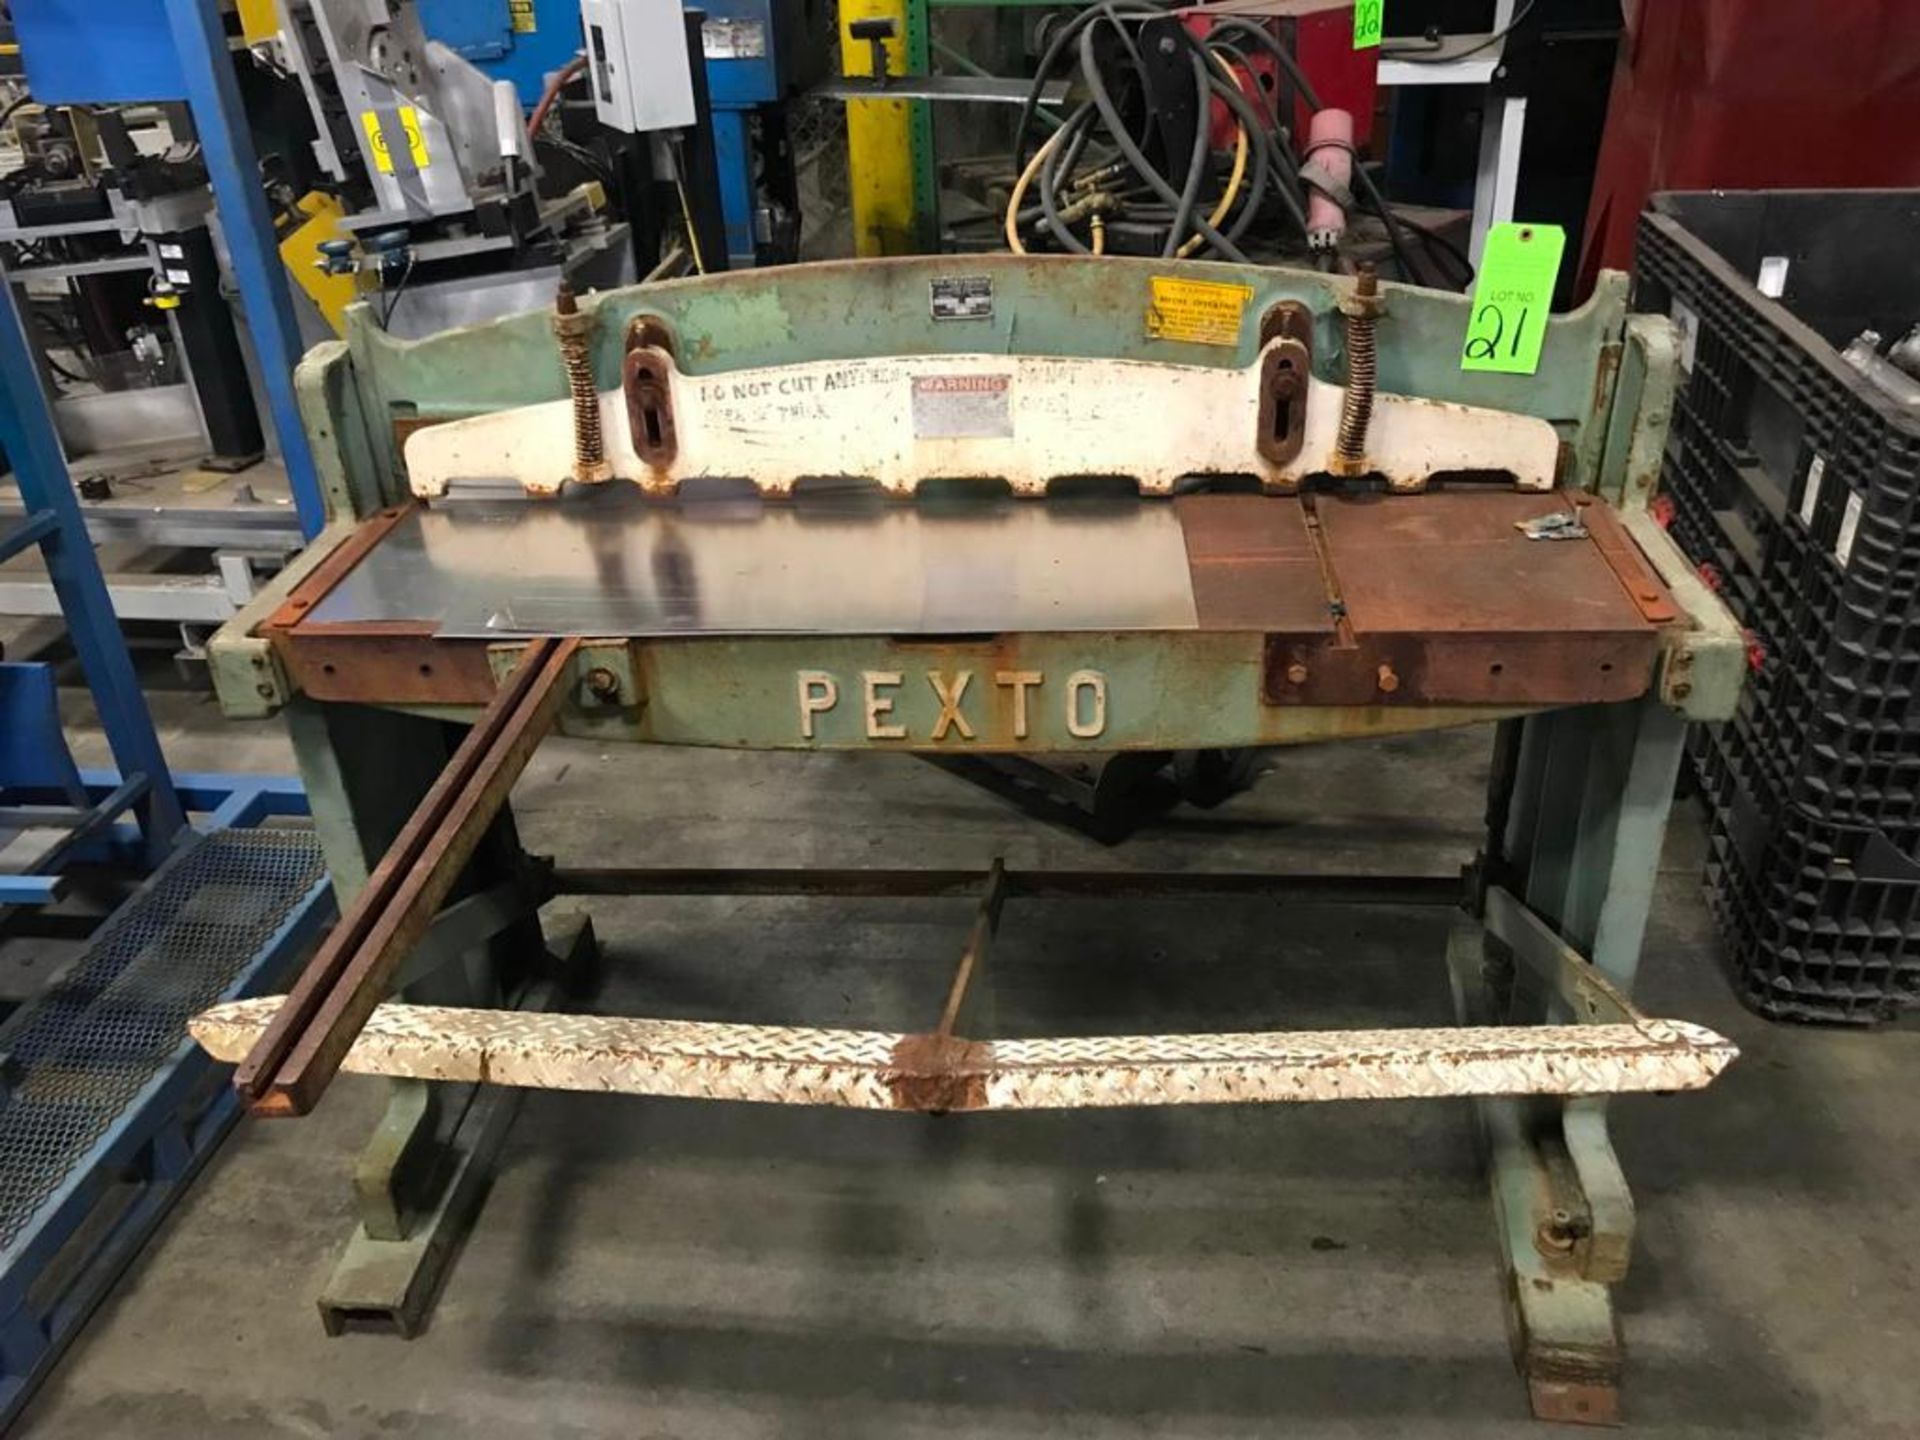 Pexto, mdl. 152-K, Foot Squaring Shear With Back Gauge - Image 3 of 4